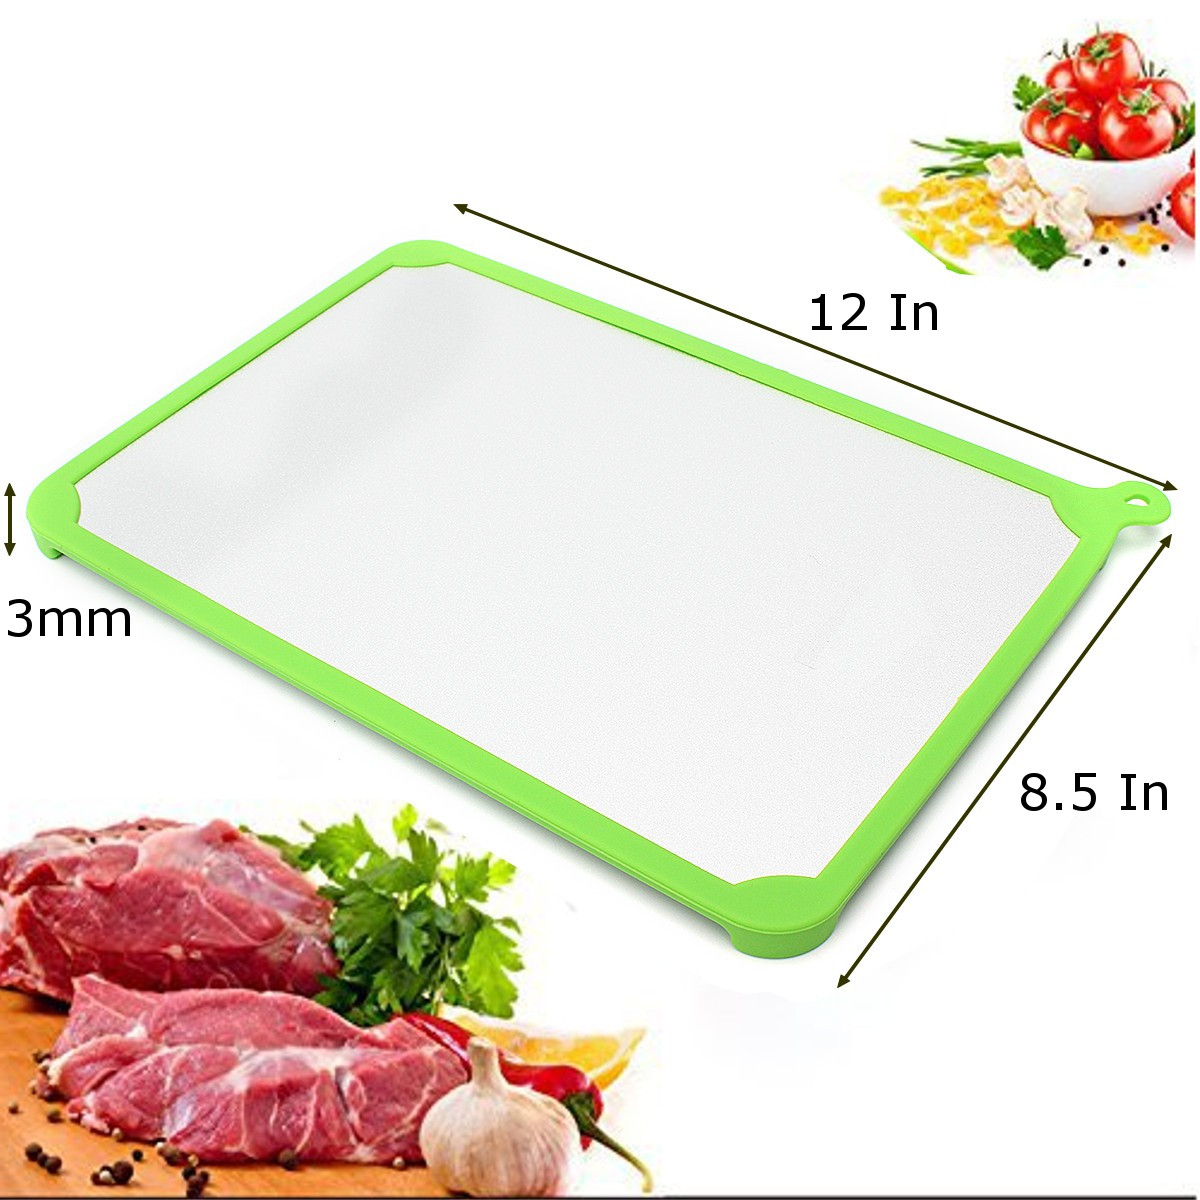 Kitchen-Green-Defrosting-Tray-Thaw-Frozen-Food-Plate-Quick-Time-Safe-Defrost-Anti-bacteria-1125942-9